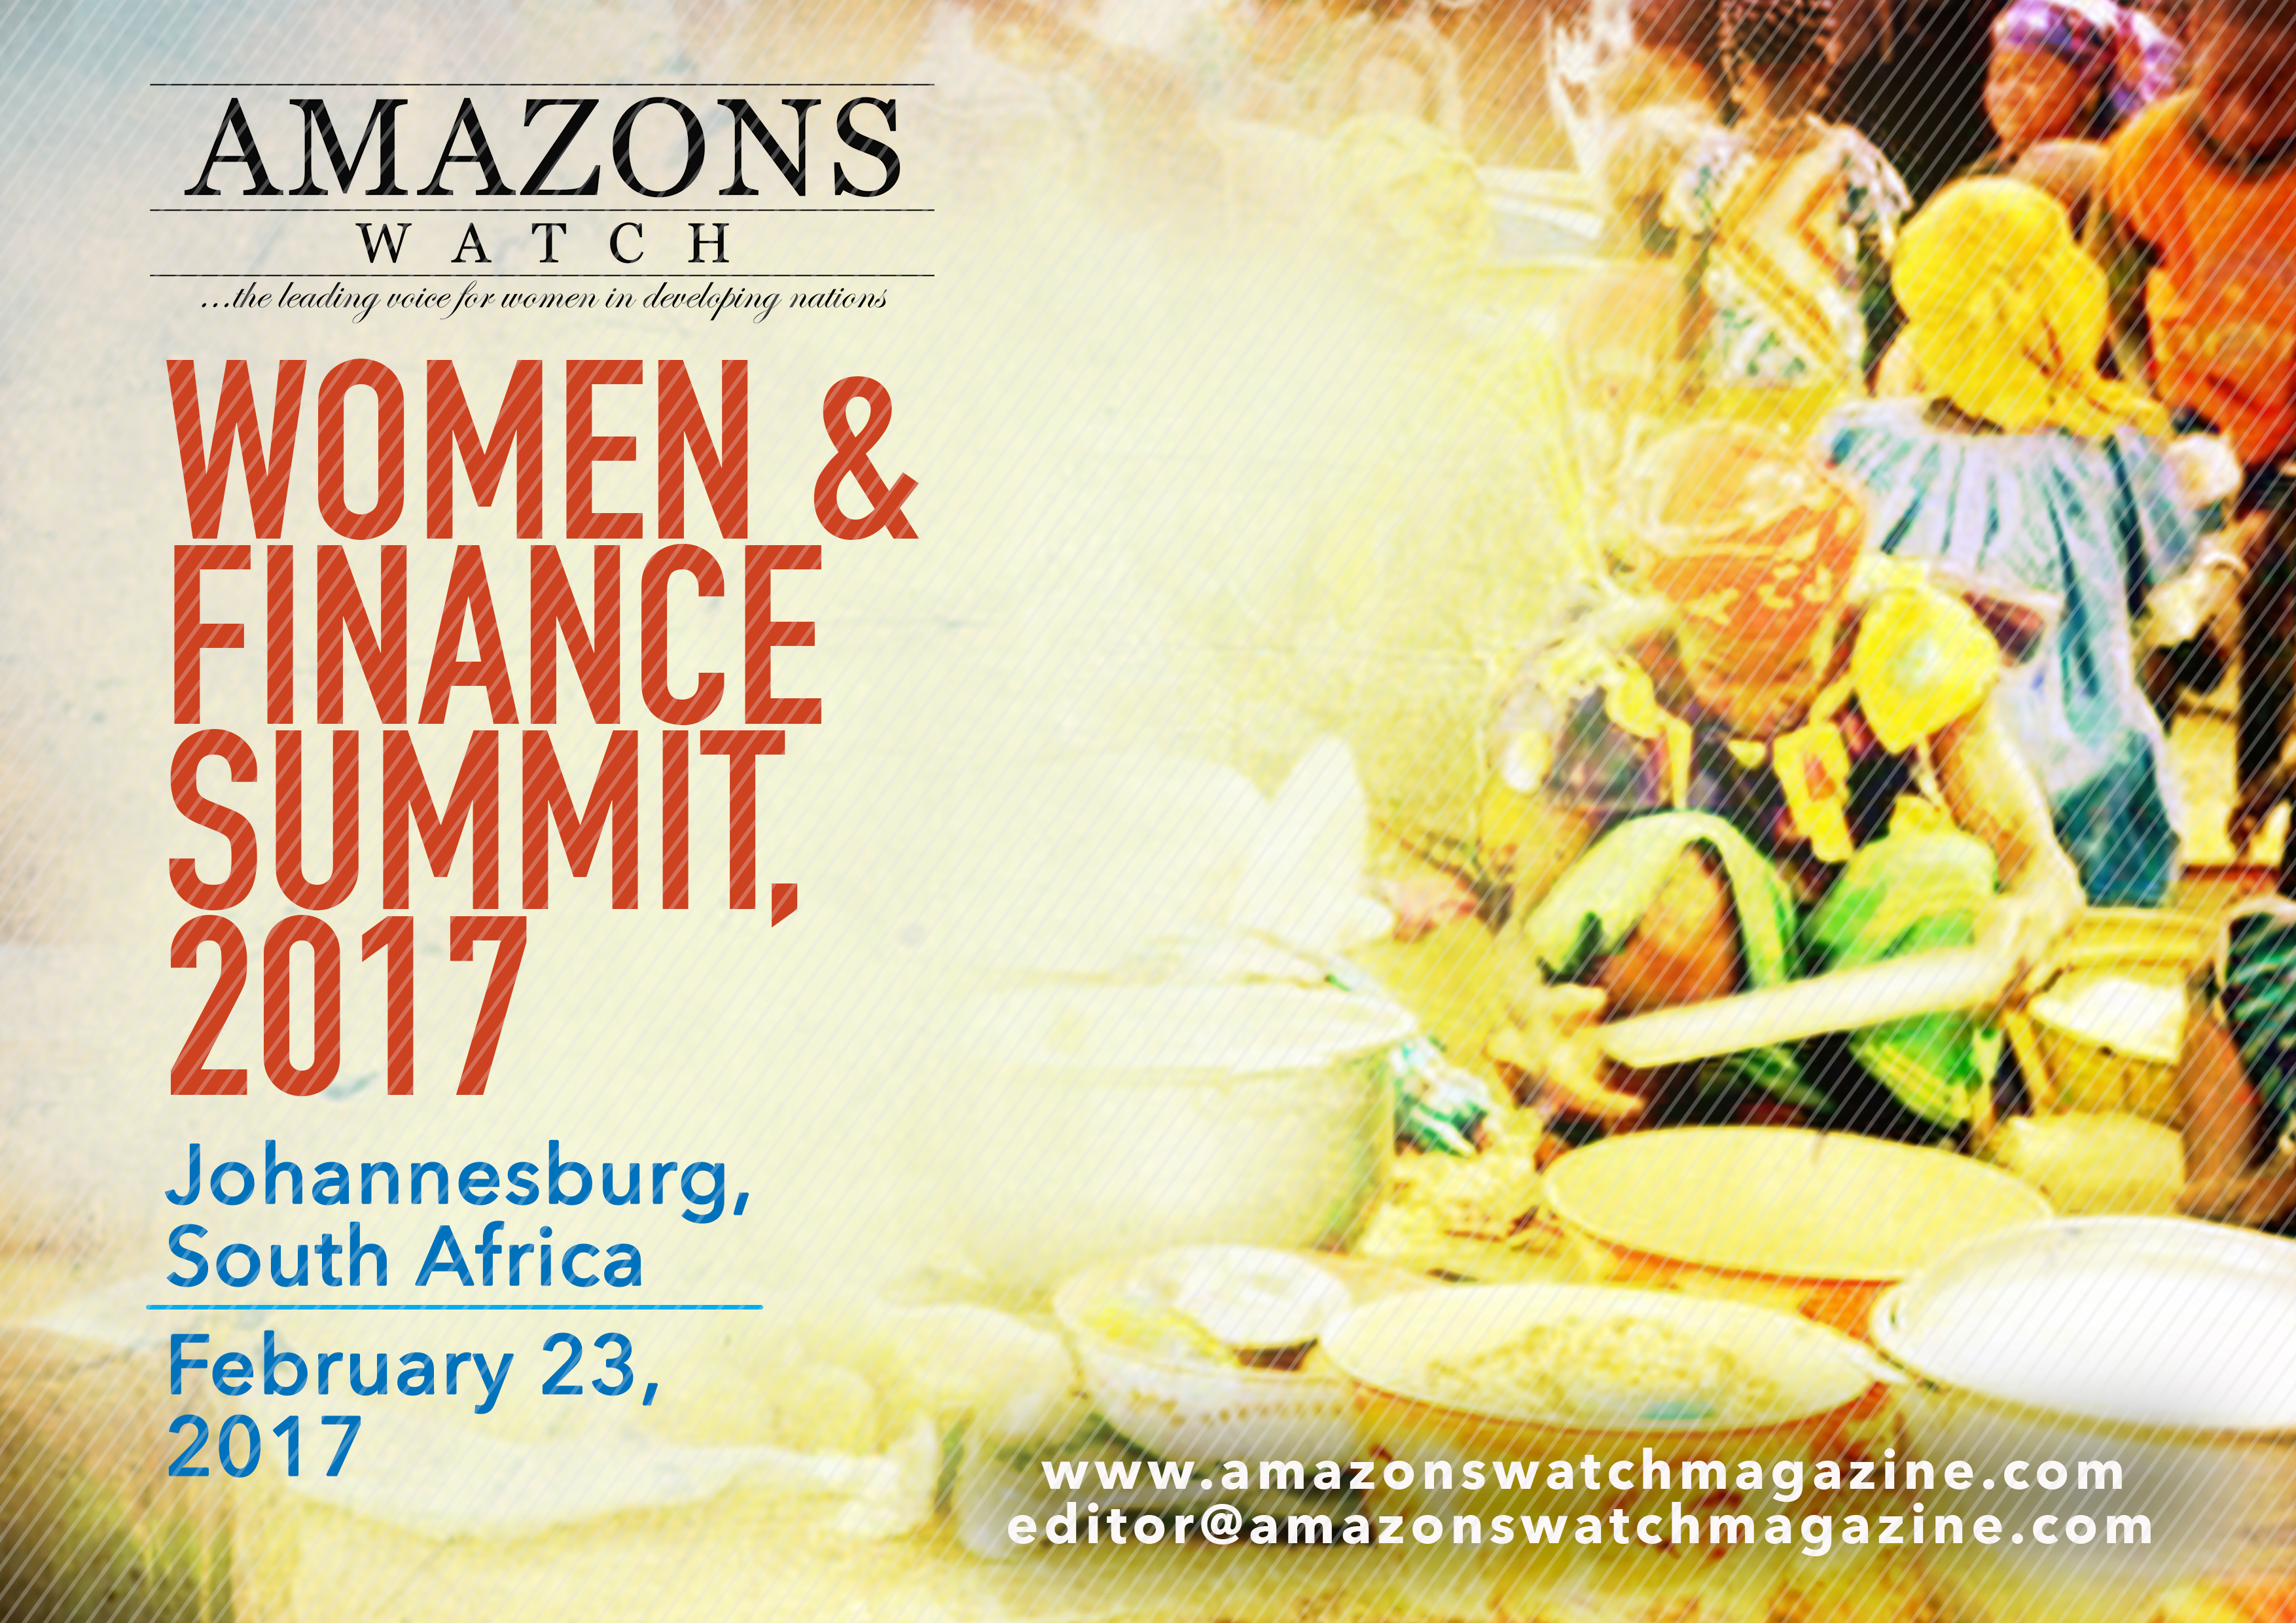 How Can Africa Scale up Women’s Access to Finance?